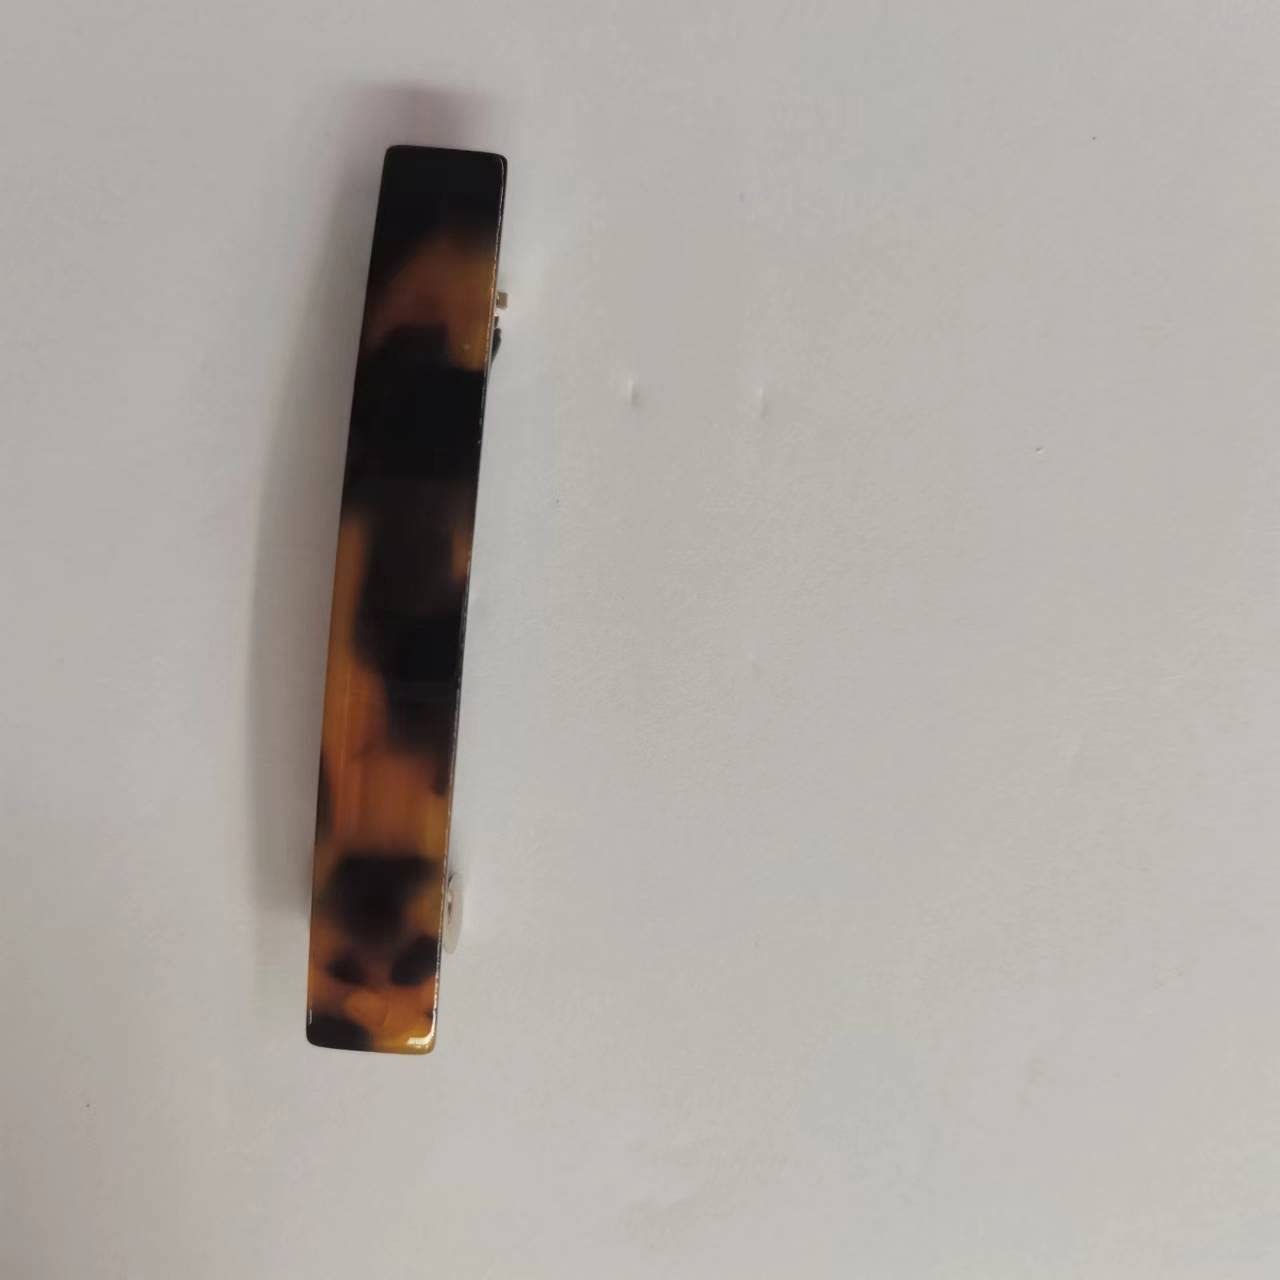 CARAVAN® Hand Made Barrette Tokyo Color 2.9 Of Celluloid Acetate Material